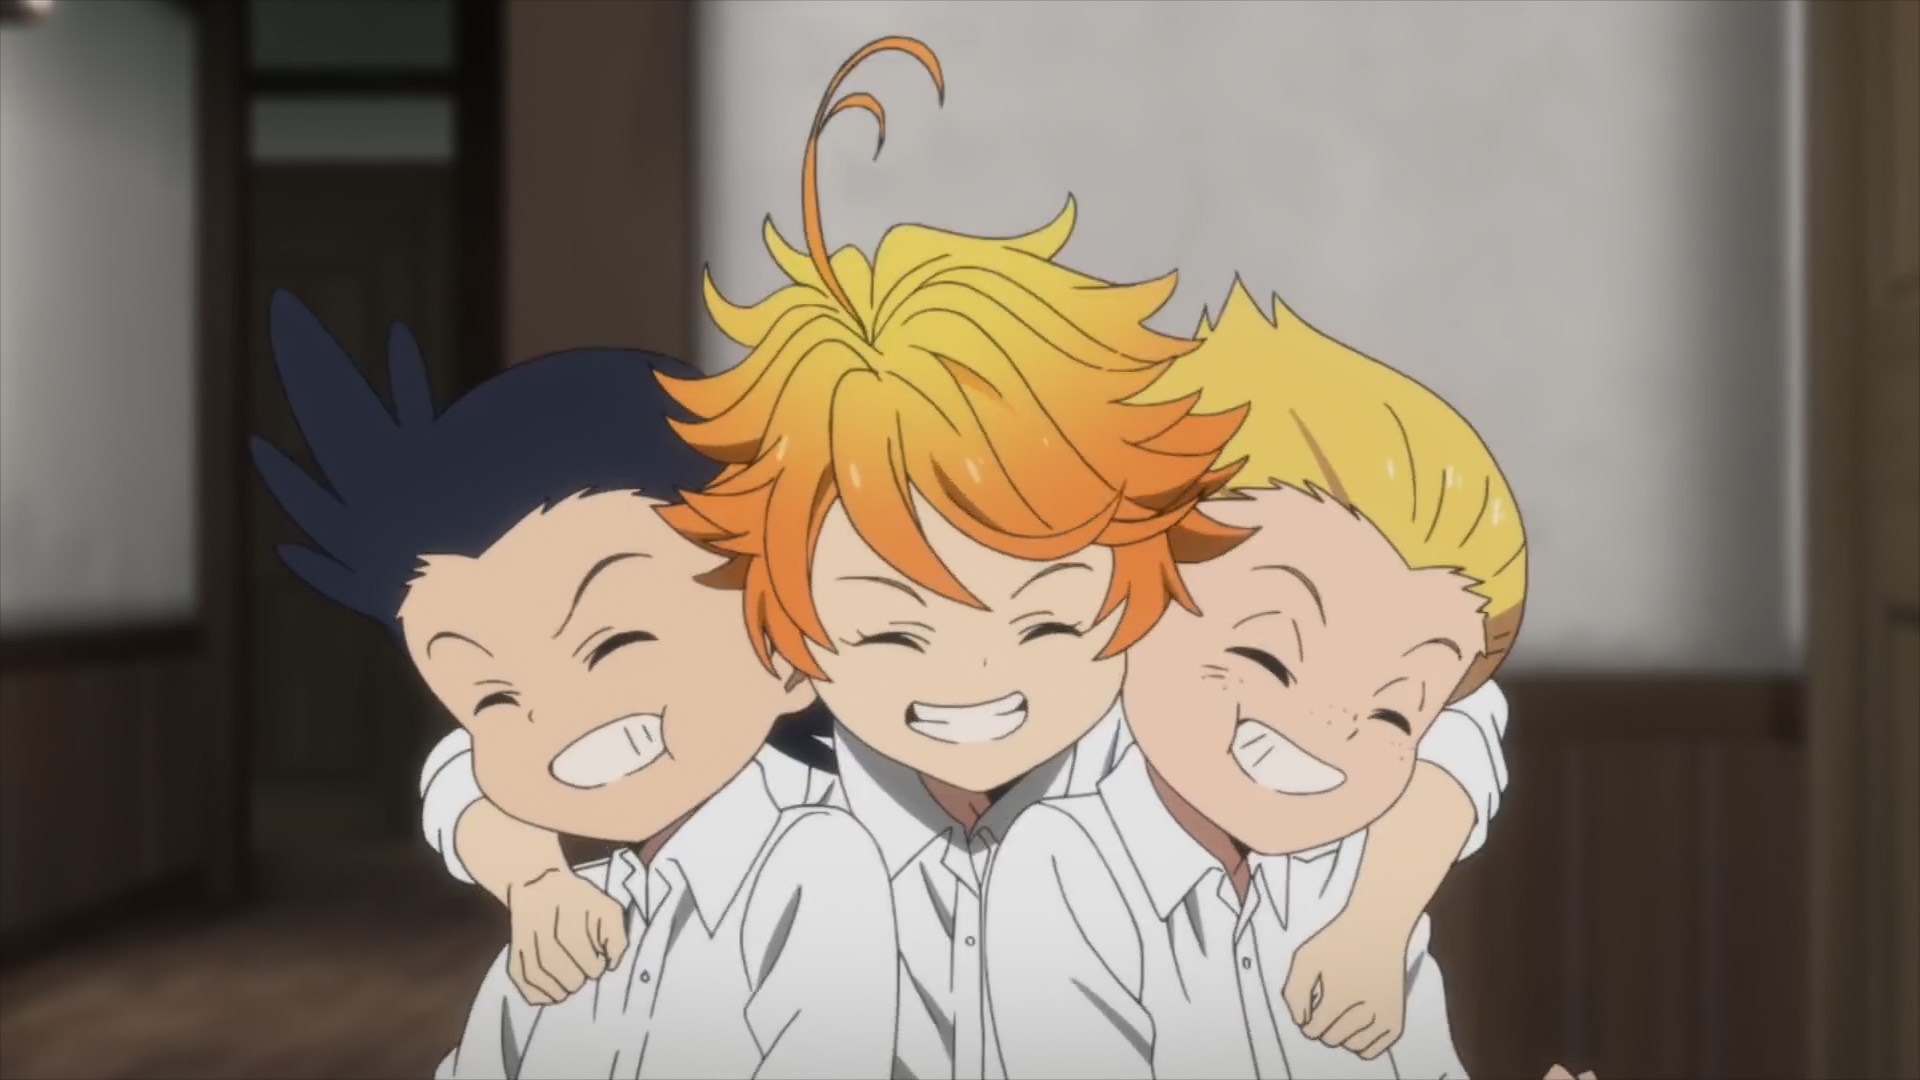 CloverWorks Global on X: This is a character design for Norman from season  1 of The Promised Neverland. Norman shows off a variety of facial  expressions, they range from being happy and